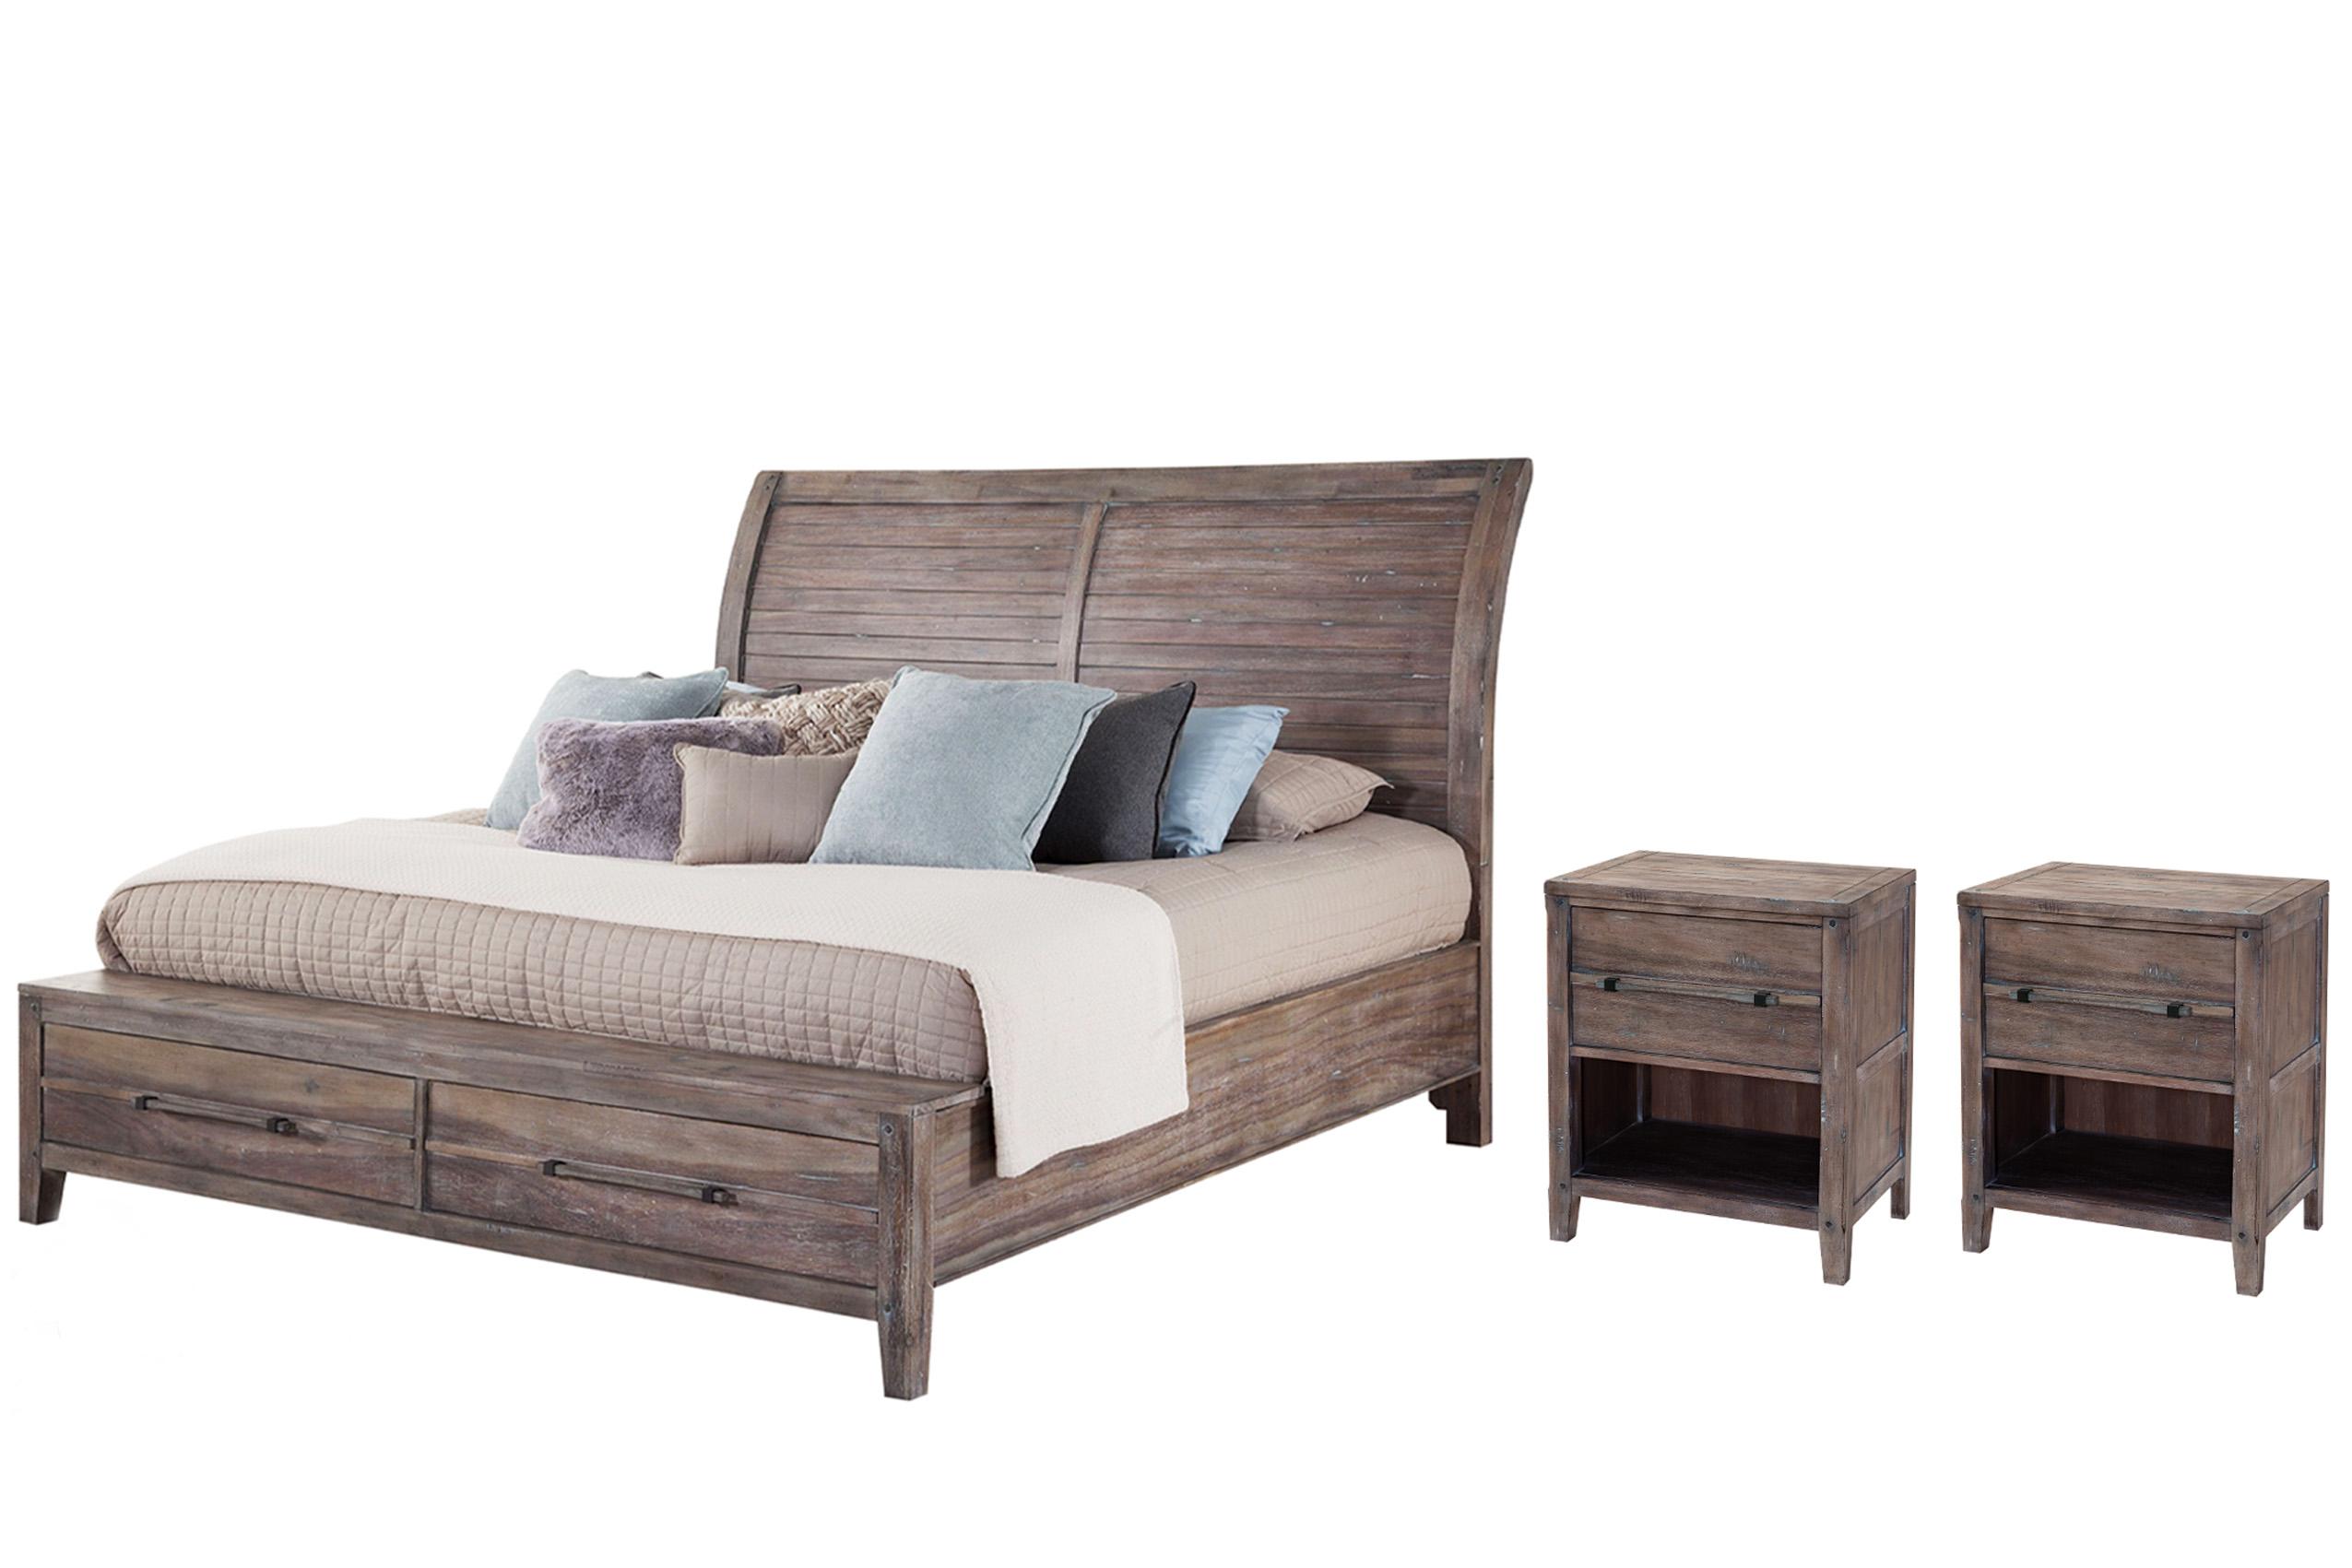 Classic, Traditional Sleigh Bedroom Set AURORA 2800-66SLES 2800-66SLES-2N-3PC in Driftwood, Gray 